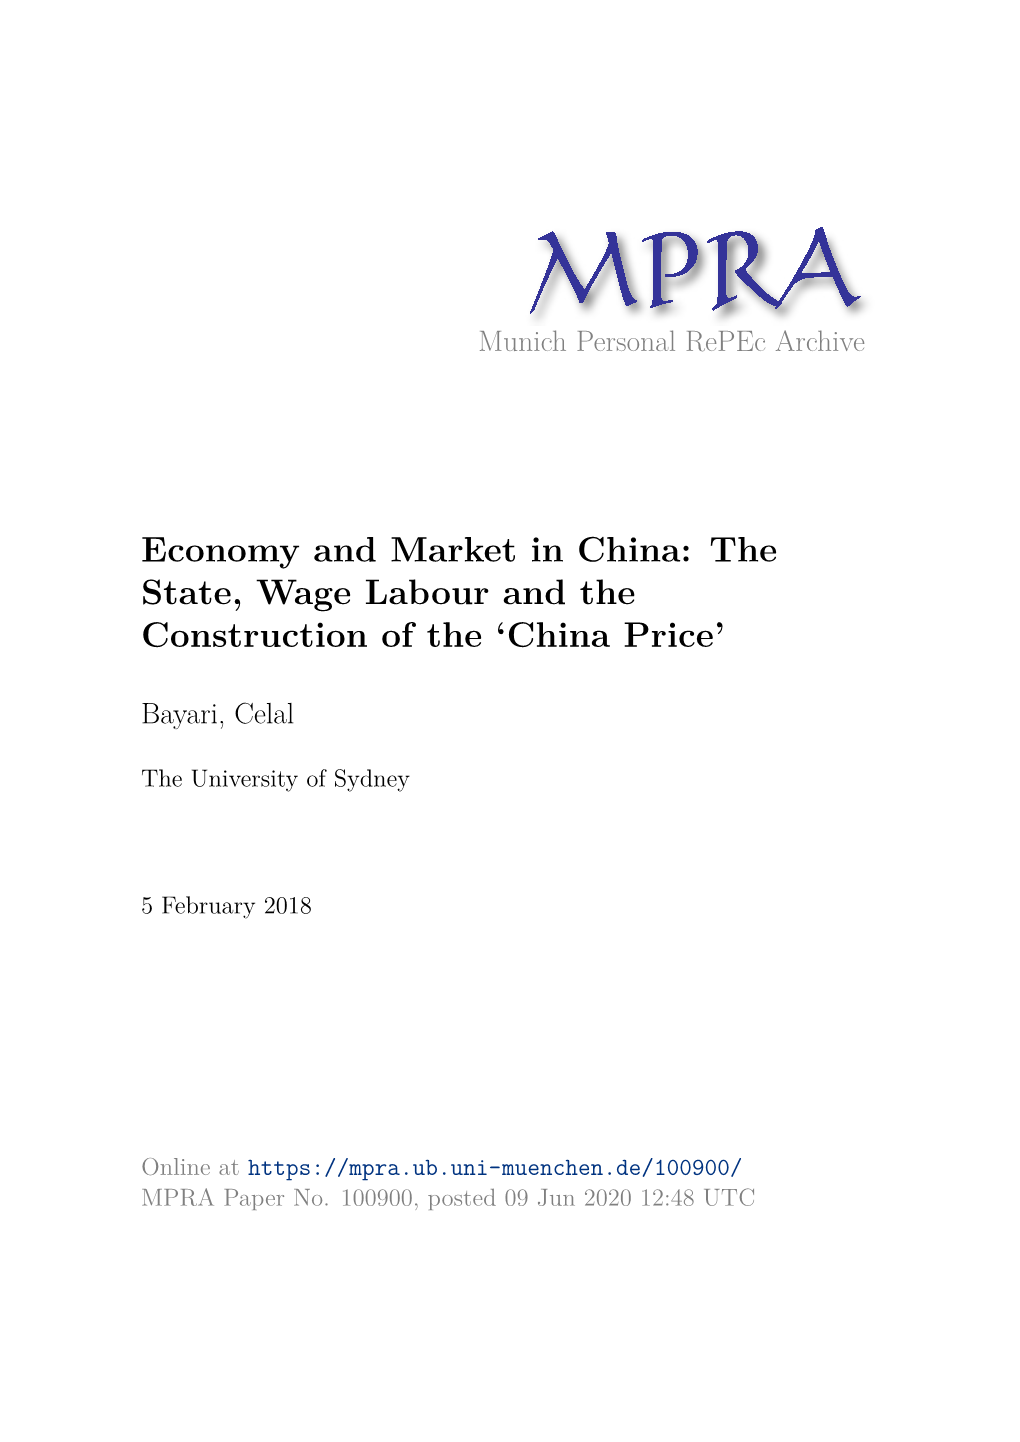 The State, Wage Labour and the Construction of the 'China Price'